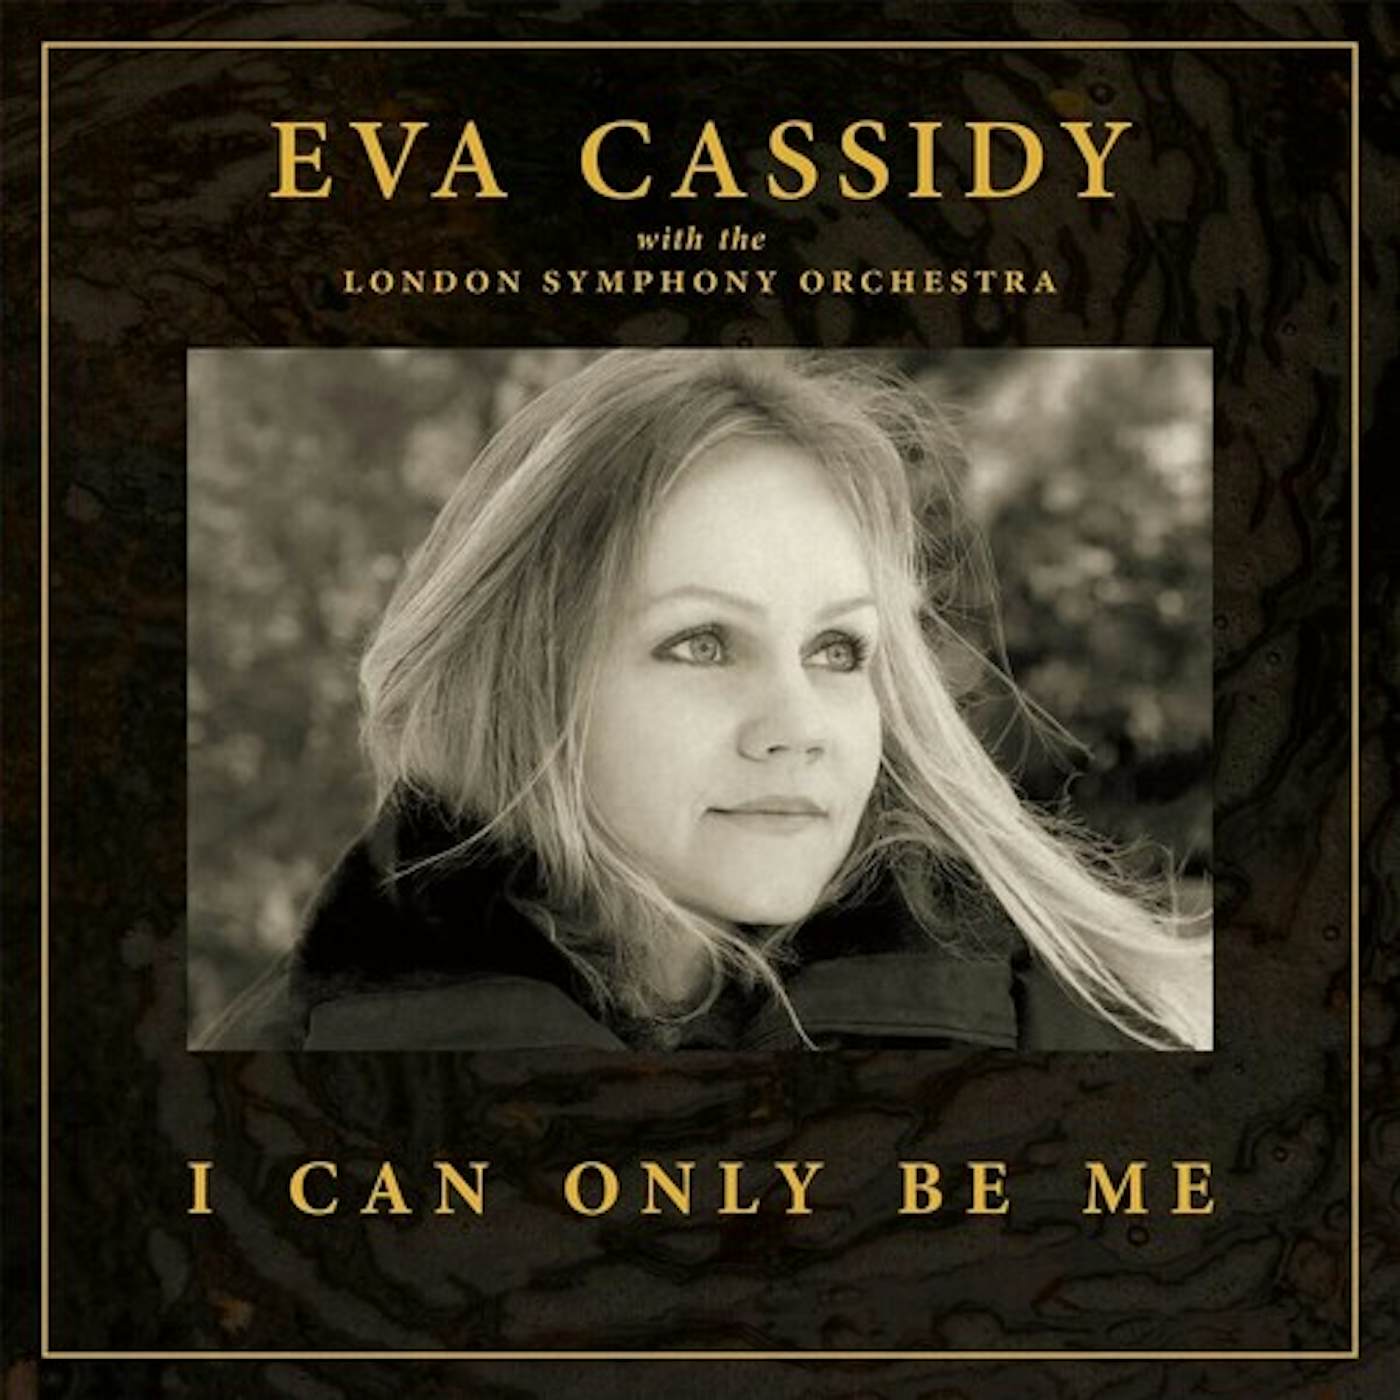 Eva Cassidy I CAN ONLY BE ME CD